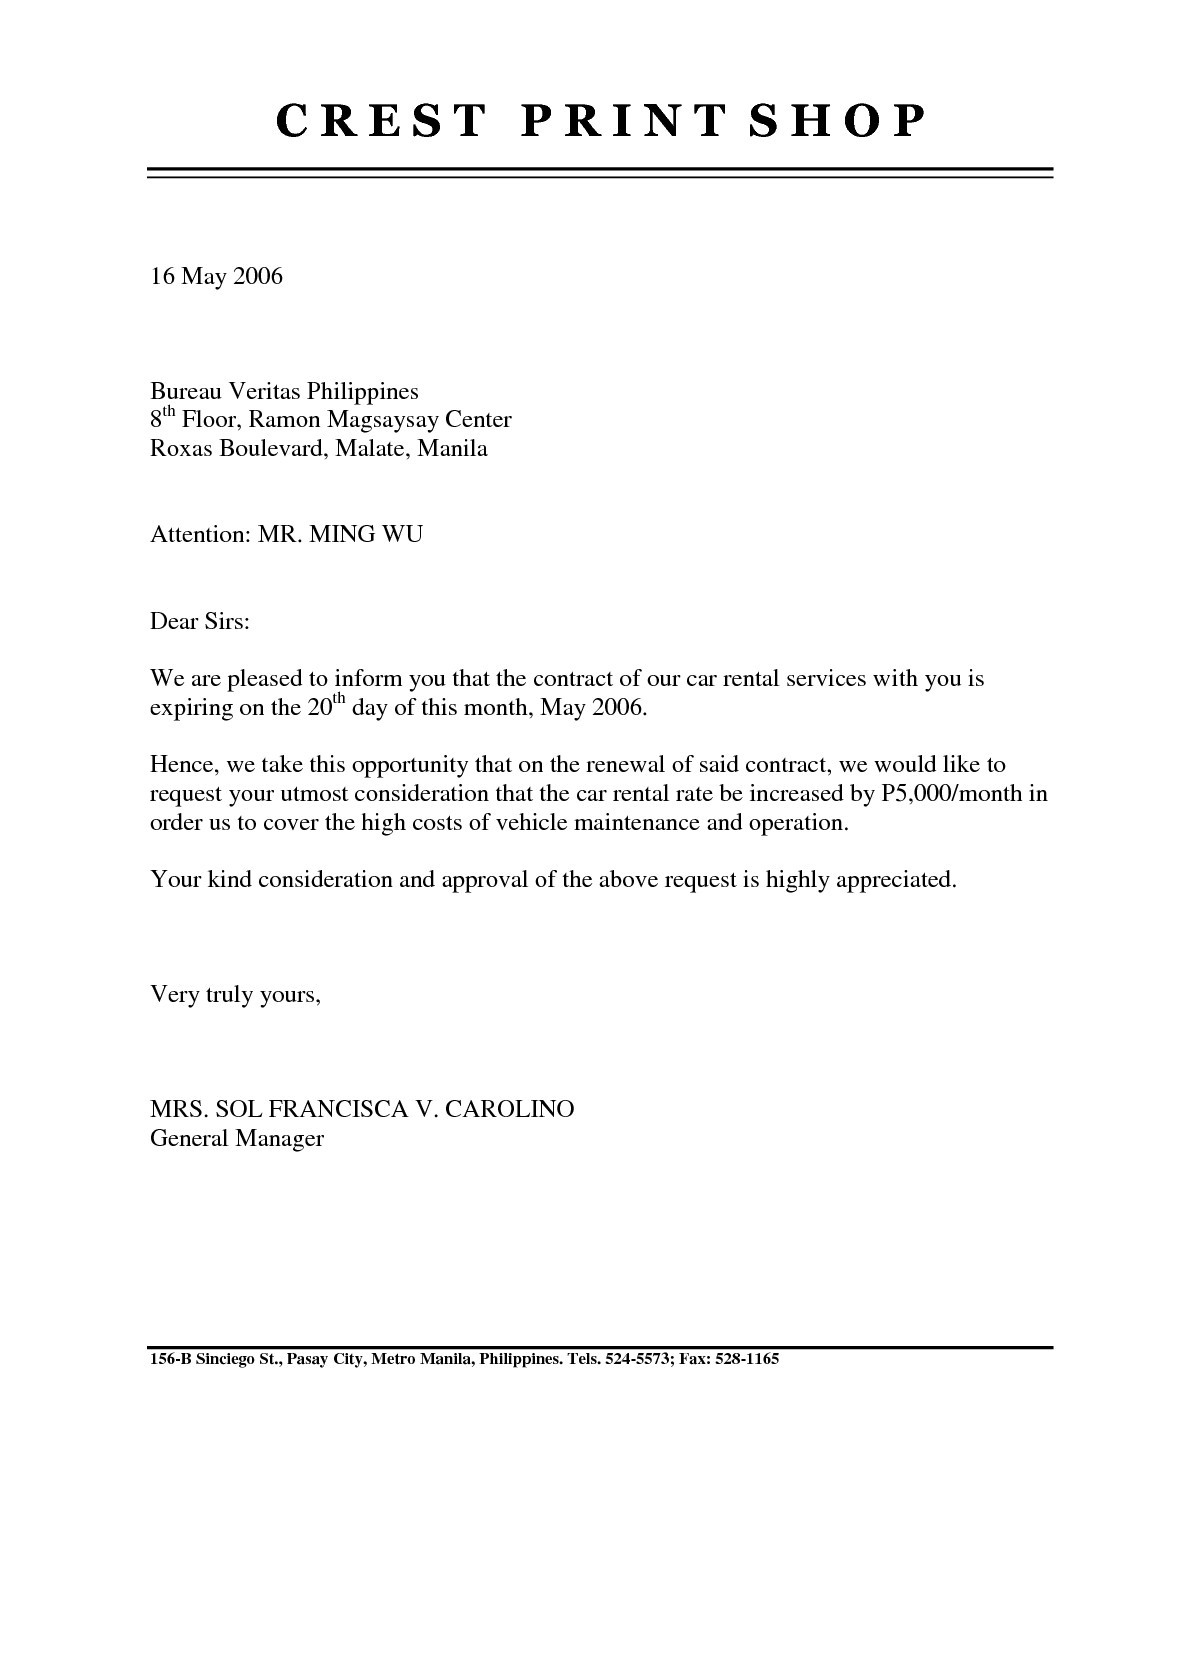 Contract Negotiation Letter Template - Debt Negotiation Letter Template